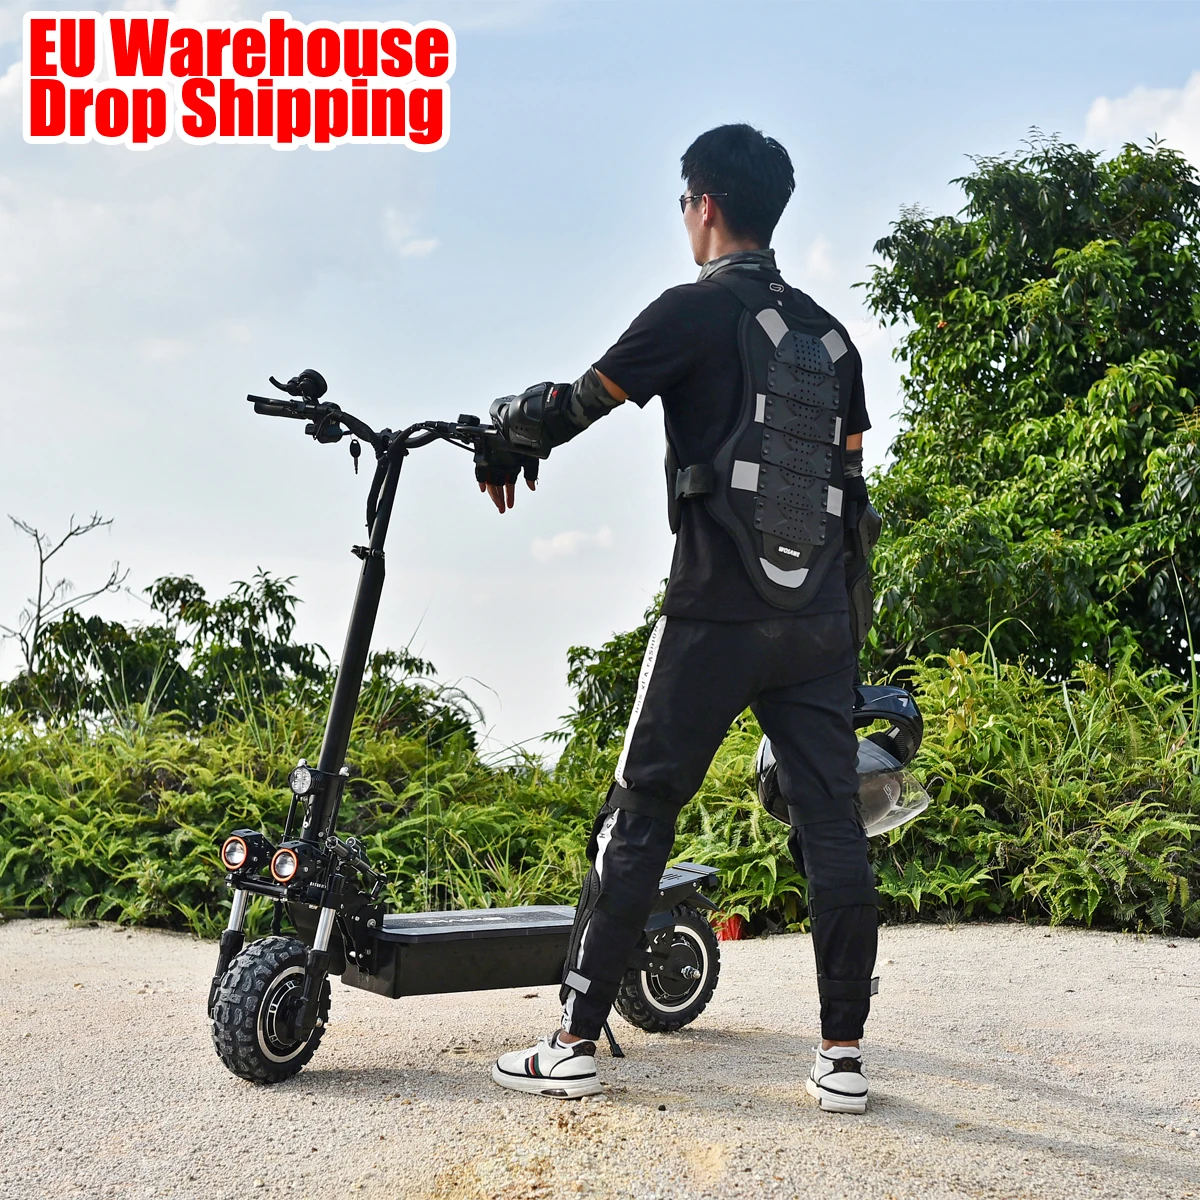 

Free Shipping Maike MK8 electric scooter europe warehouse stock 5000w double motor high speed 80kmh electric scooter